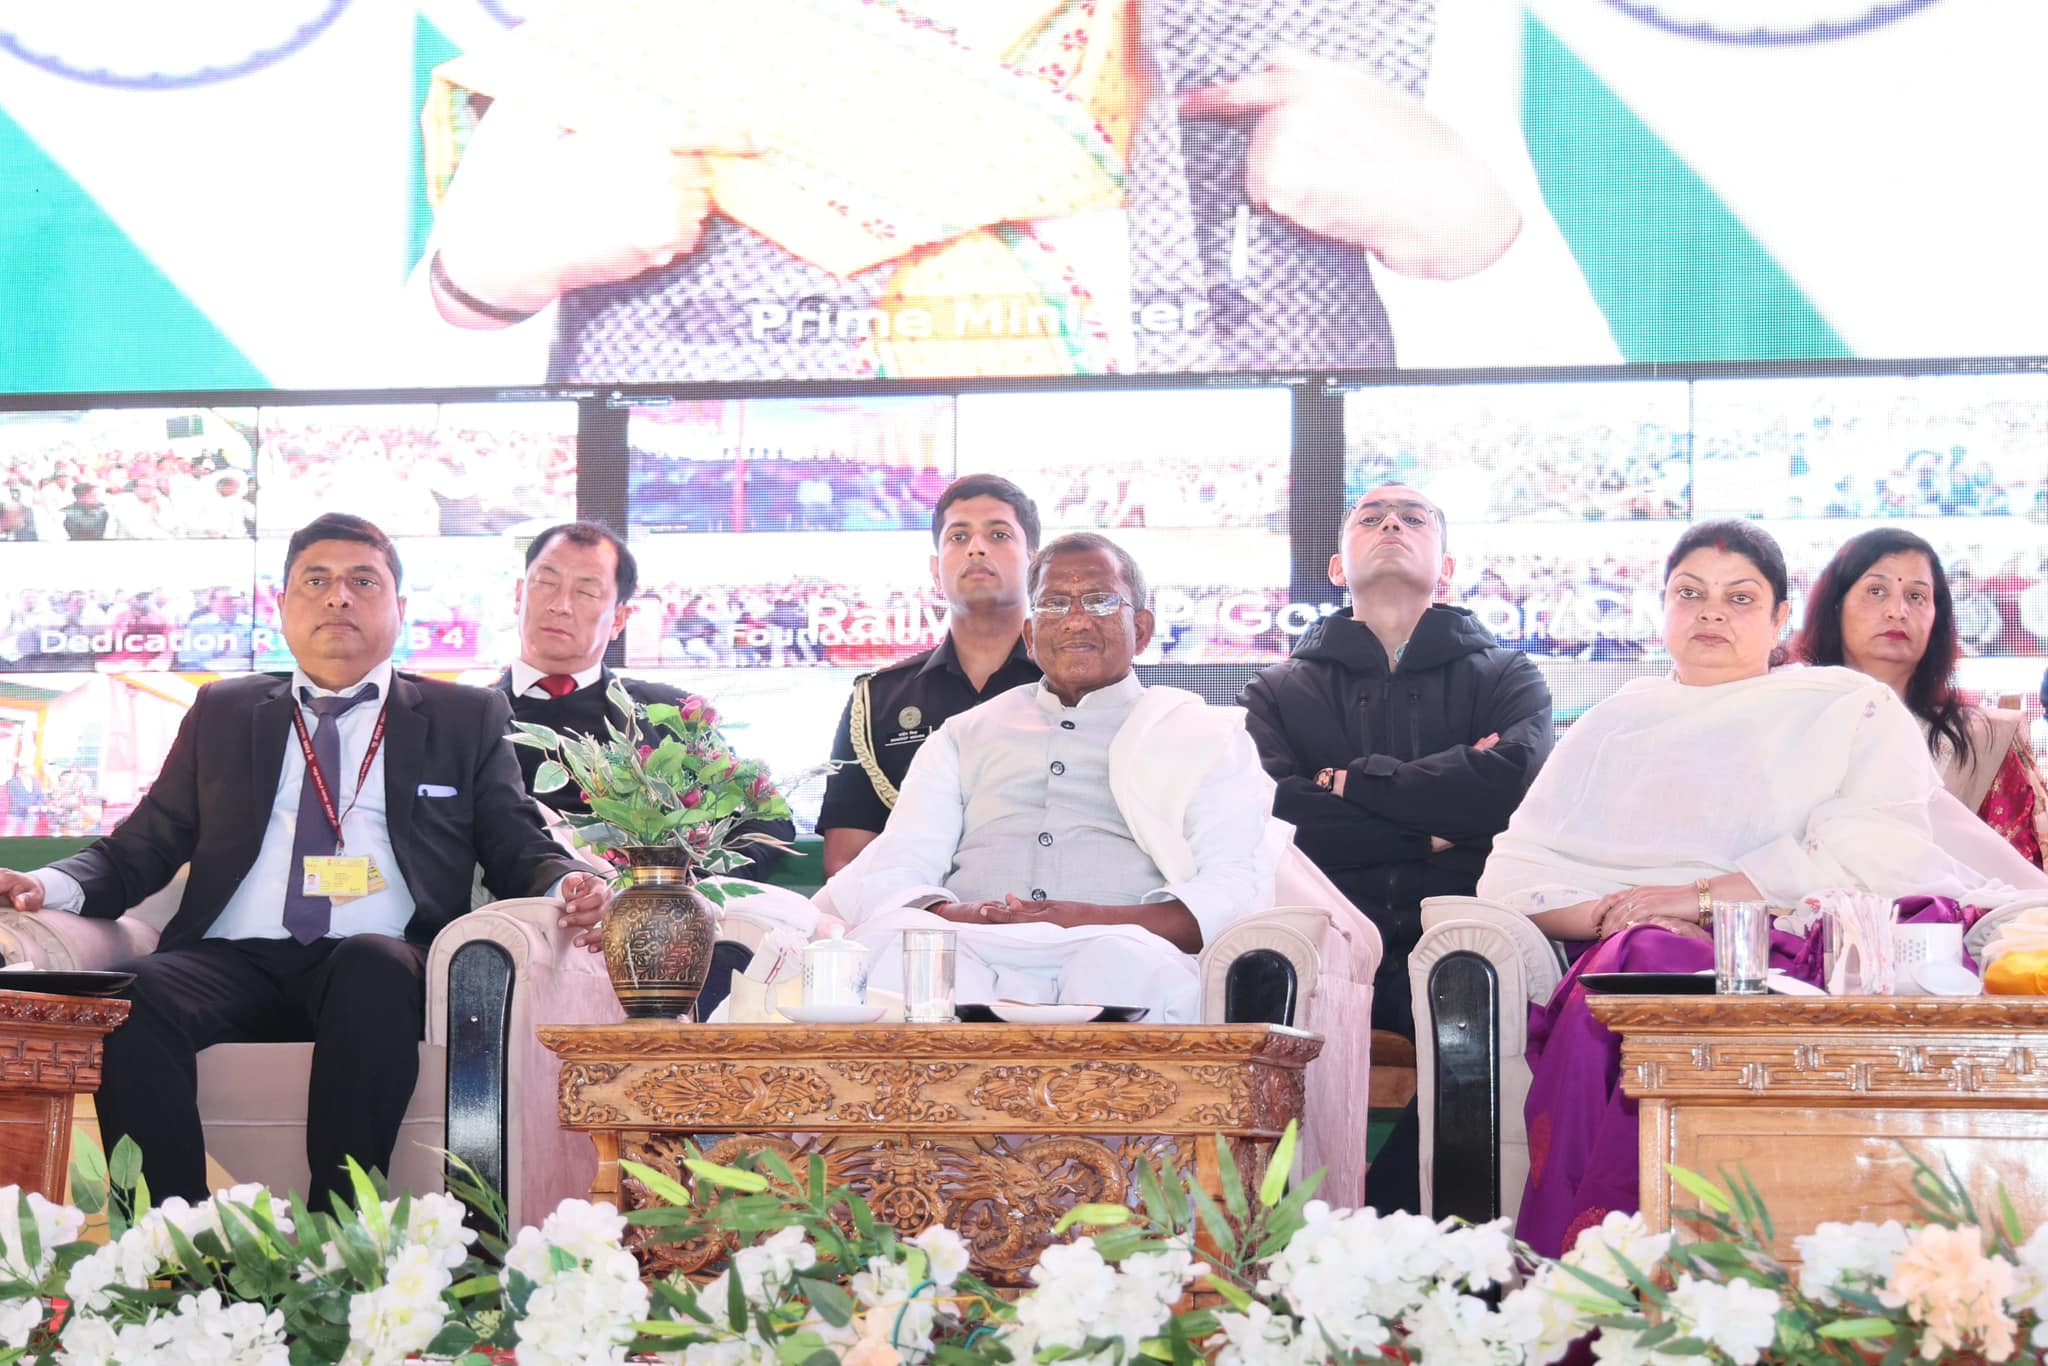 PM Virtually Laid Foundation Stone For Sikkim’s First Railway Station At Rangpo In Khanikhola